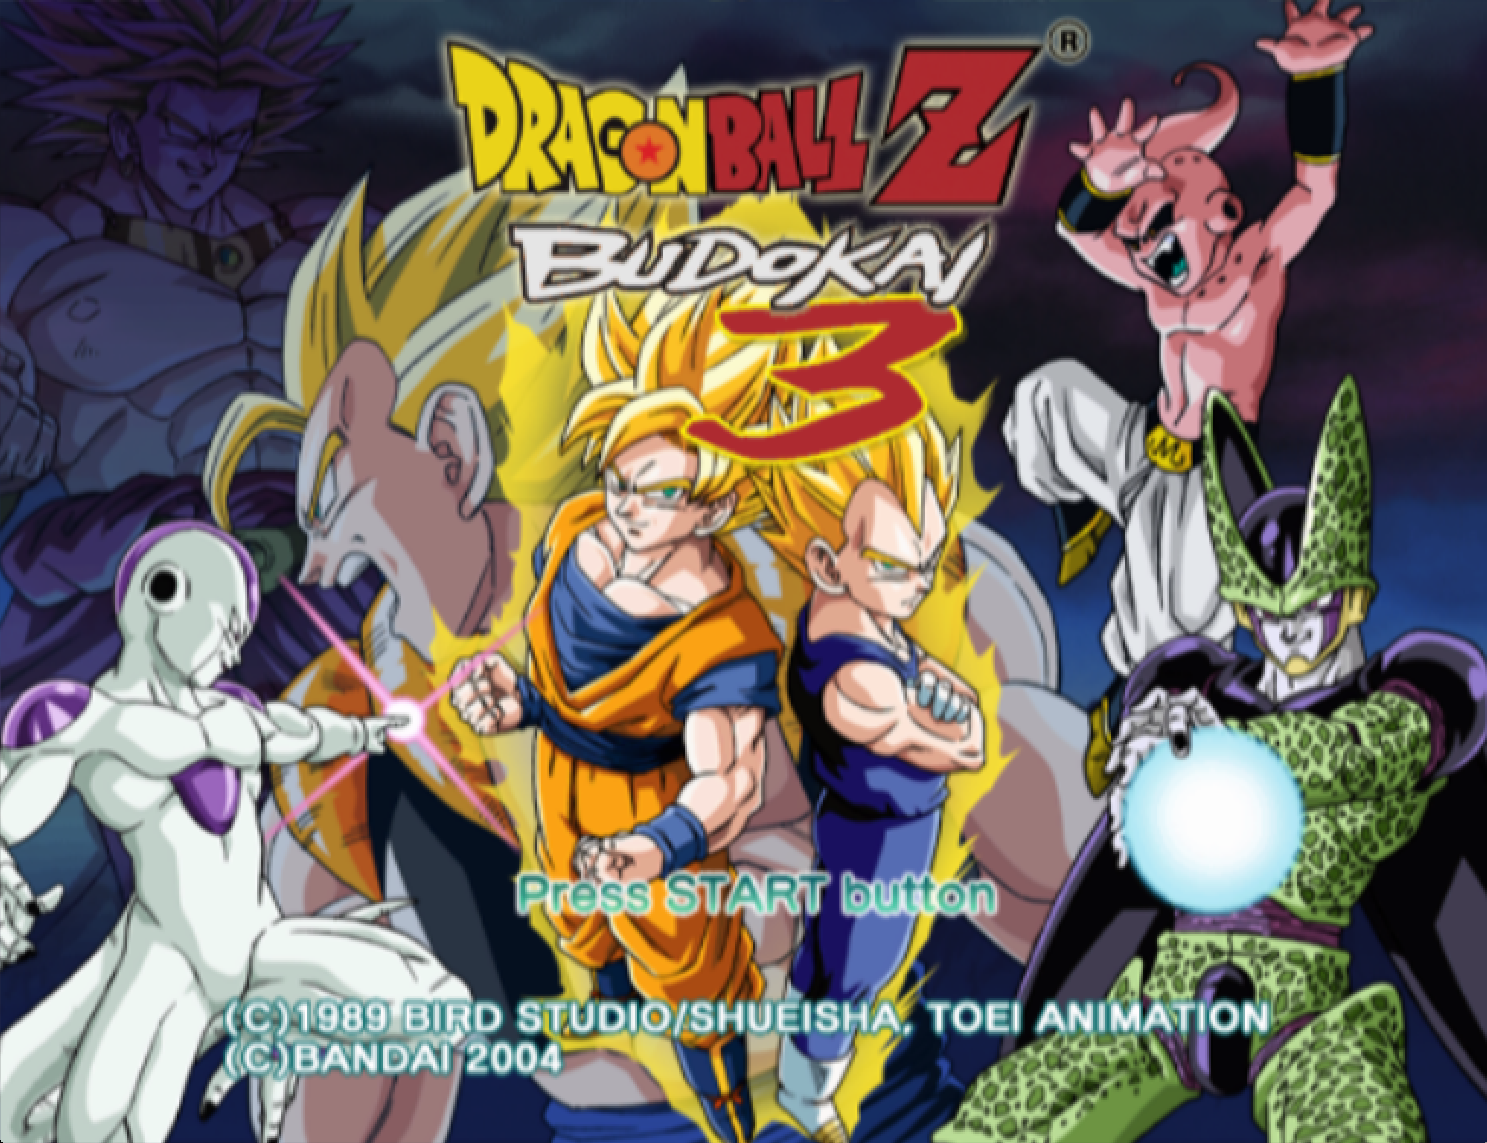 Budokai series begins another tournament of champions where only one fighter can prevail. Dragon Ball Z Budokai 3 Review Twisted Bard Gaming